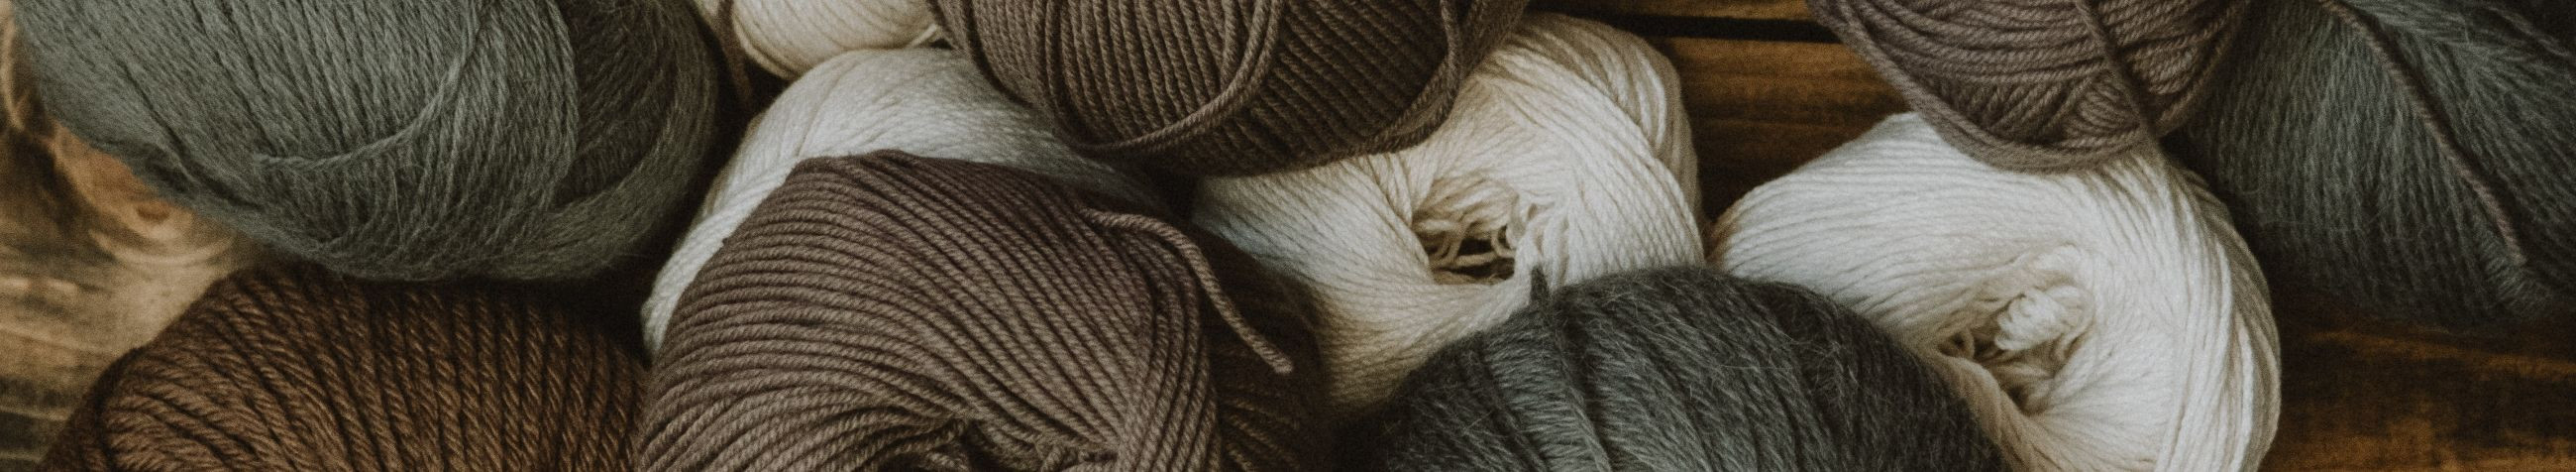 We offer an exquisite selection of the finest yarns sourced from Italy and beyond.